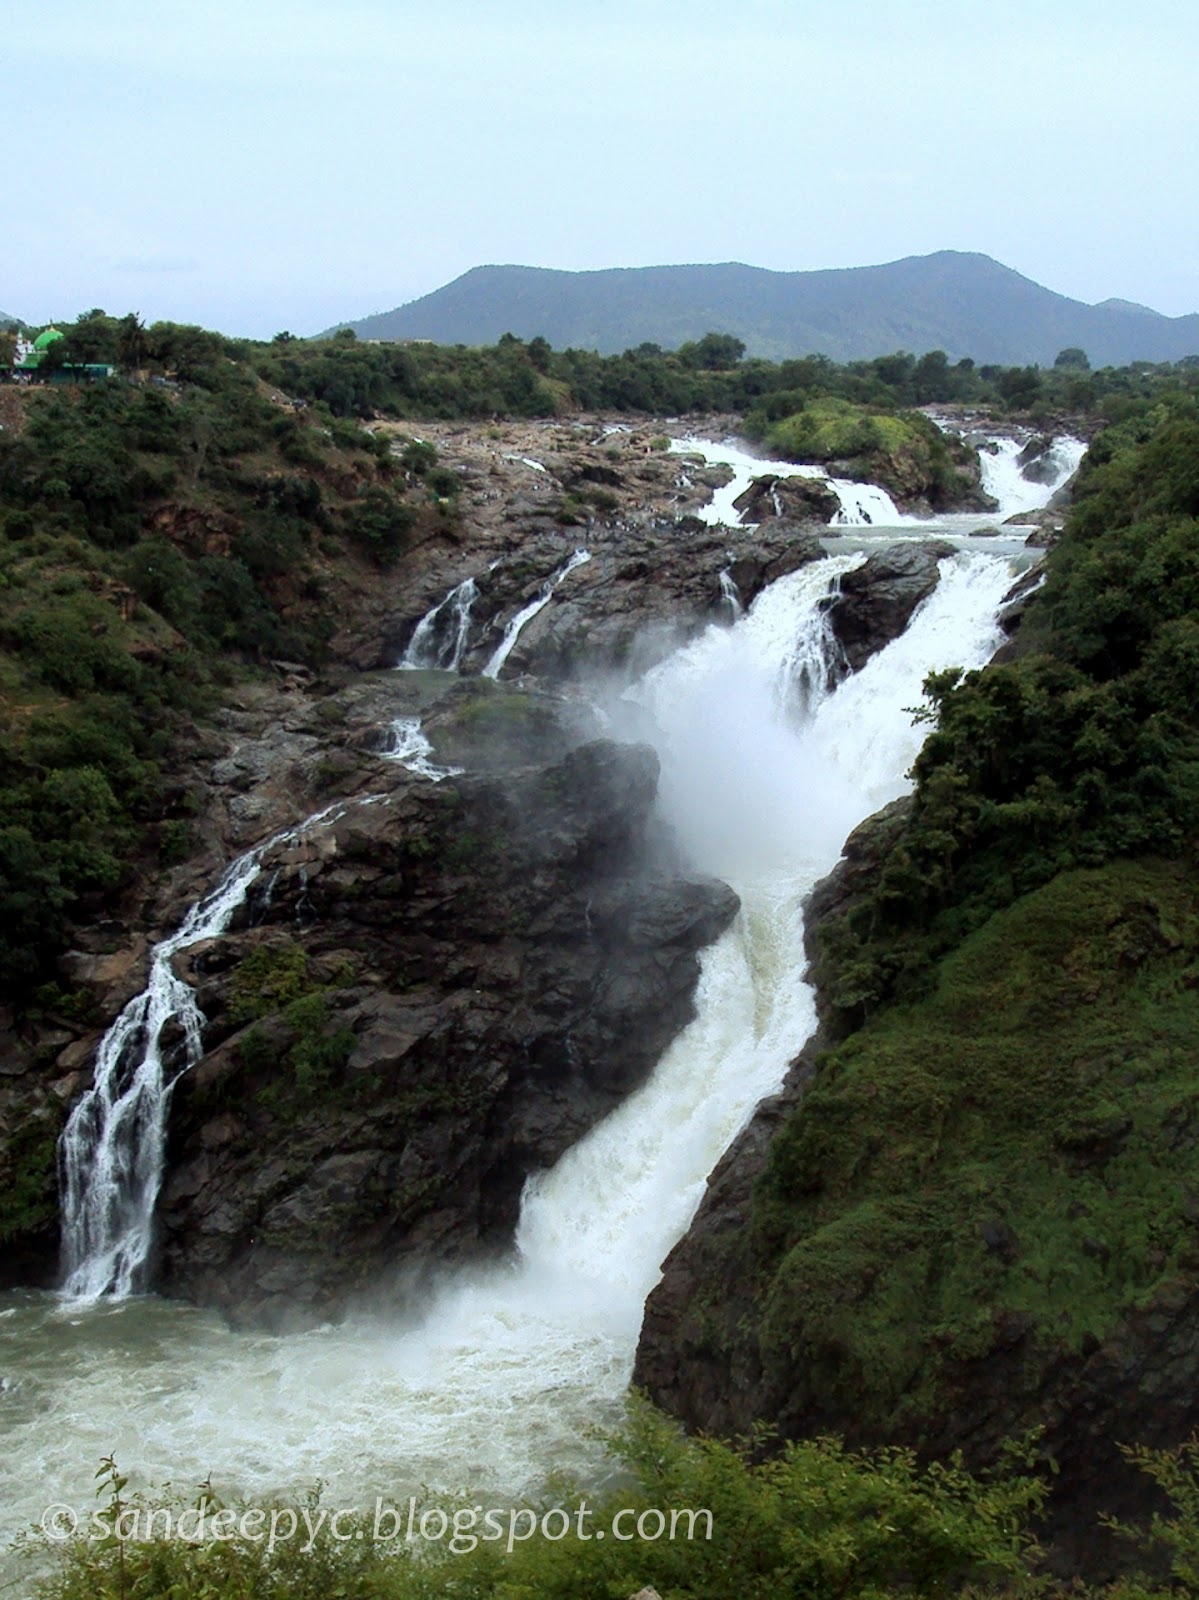 The left section of Gaganachukki falls